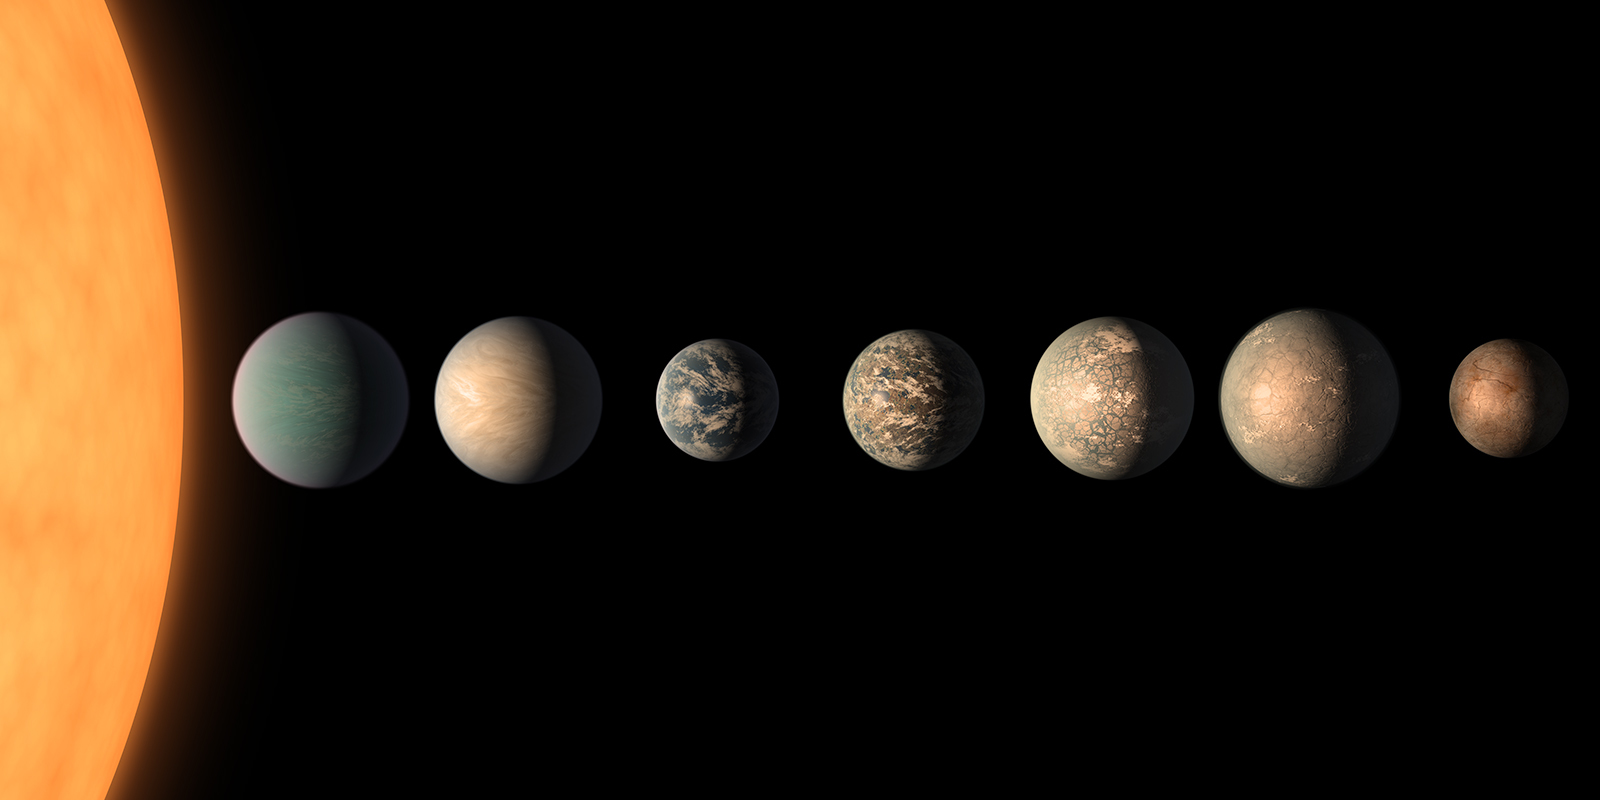 An illustration shows what the TRAPPIST-1 planetary system may look like, based on available data about the planetsâ diameters, masses, and distances from the host star. CREDIT: NASA/JPL-Caltech
